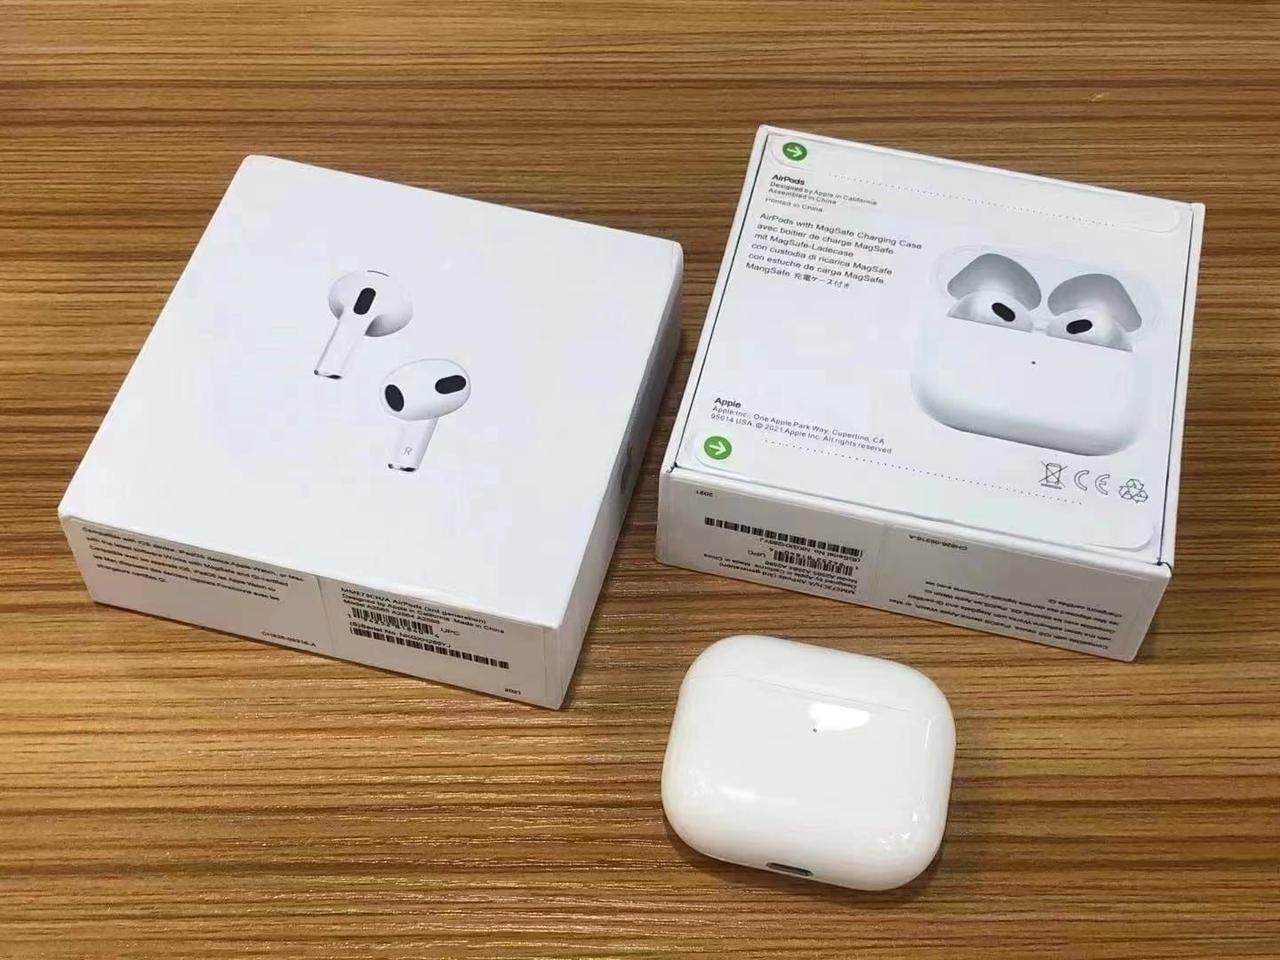 A look at the Apple AirPods 